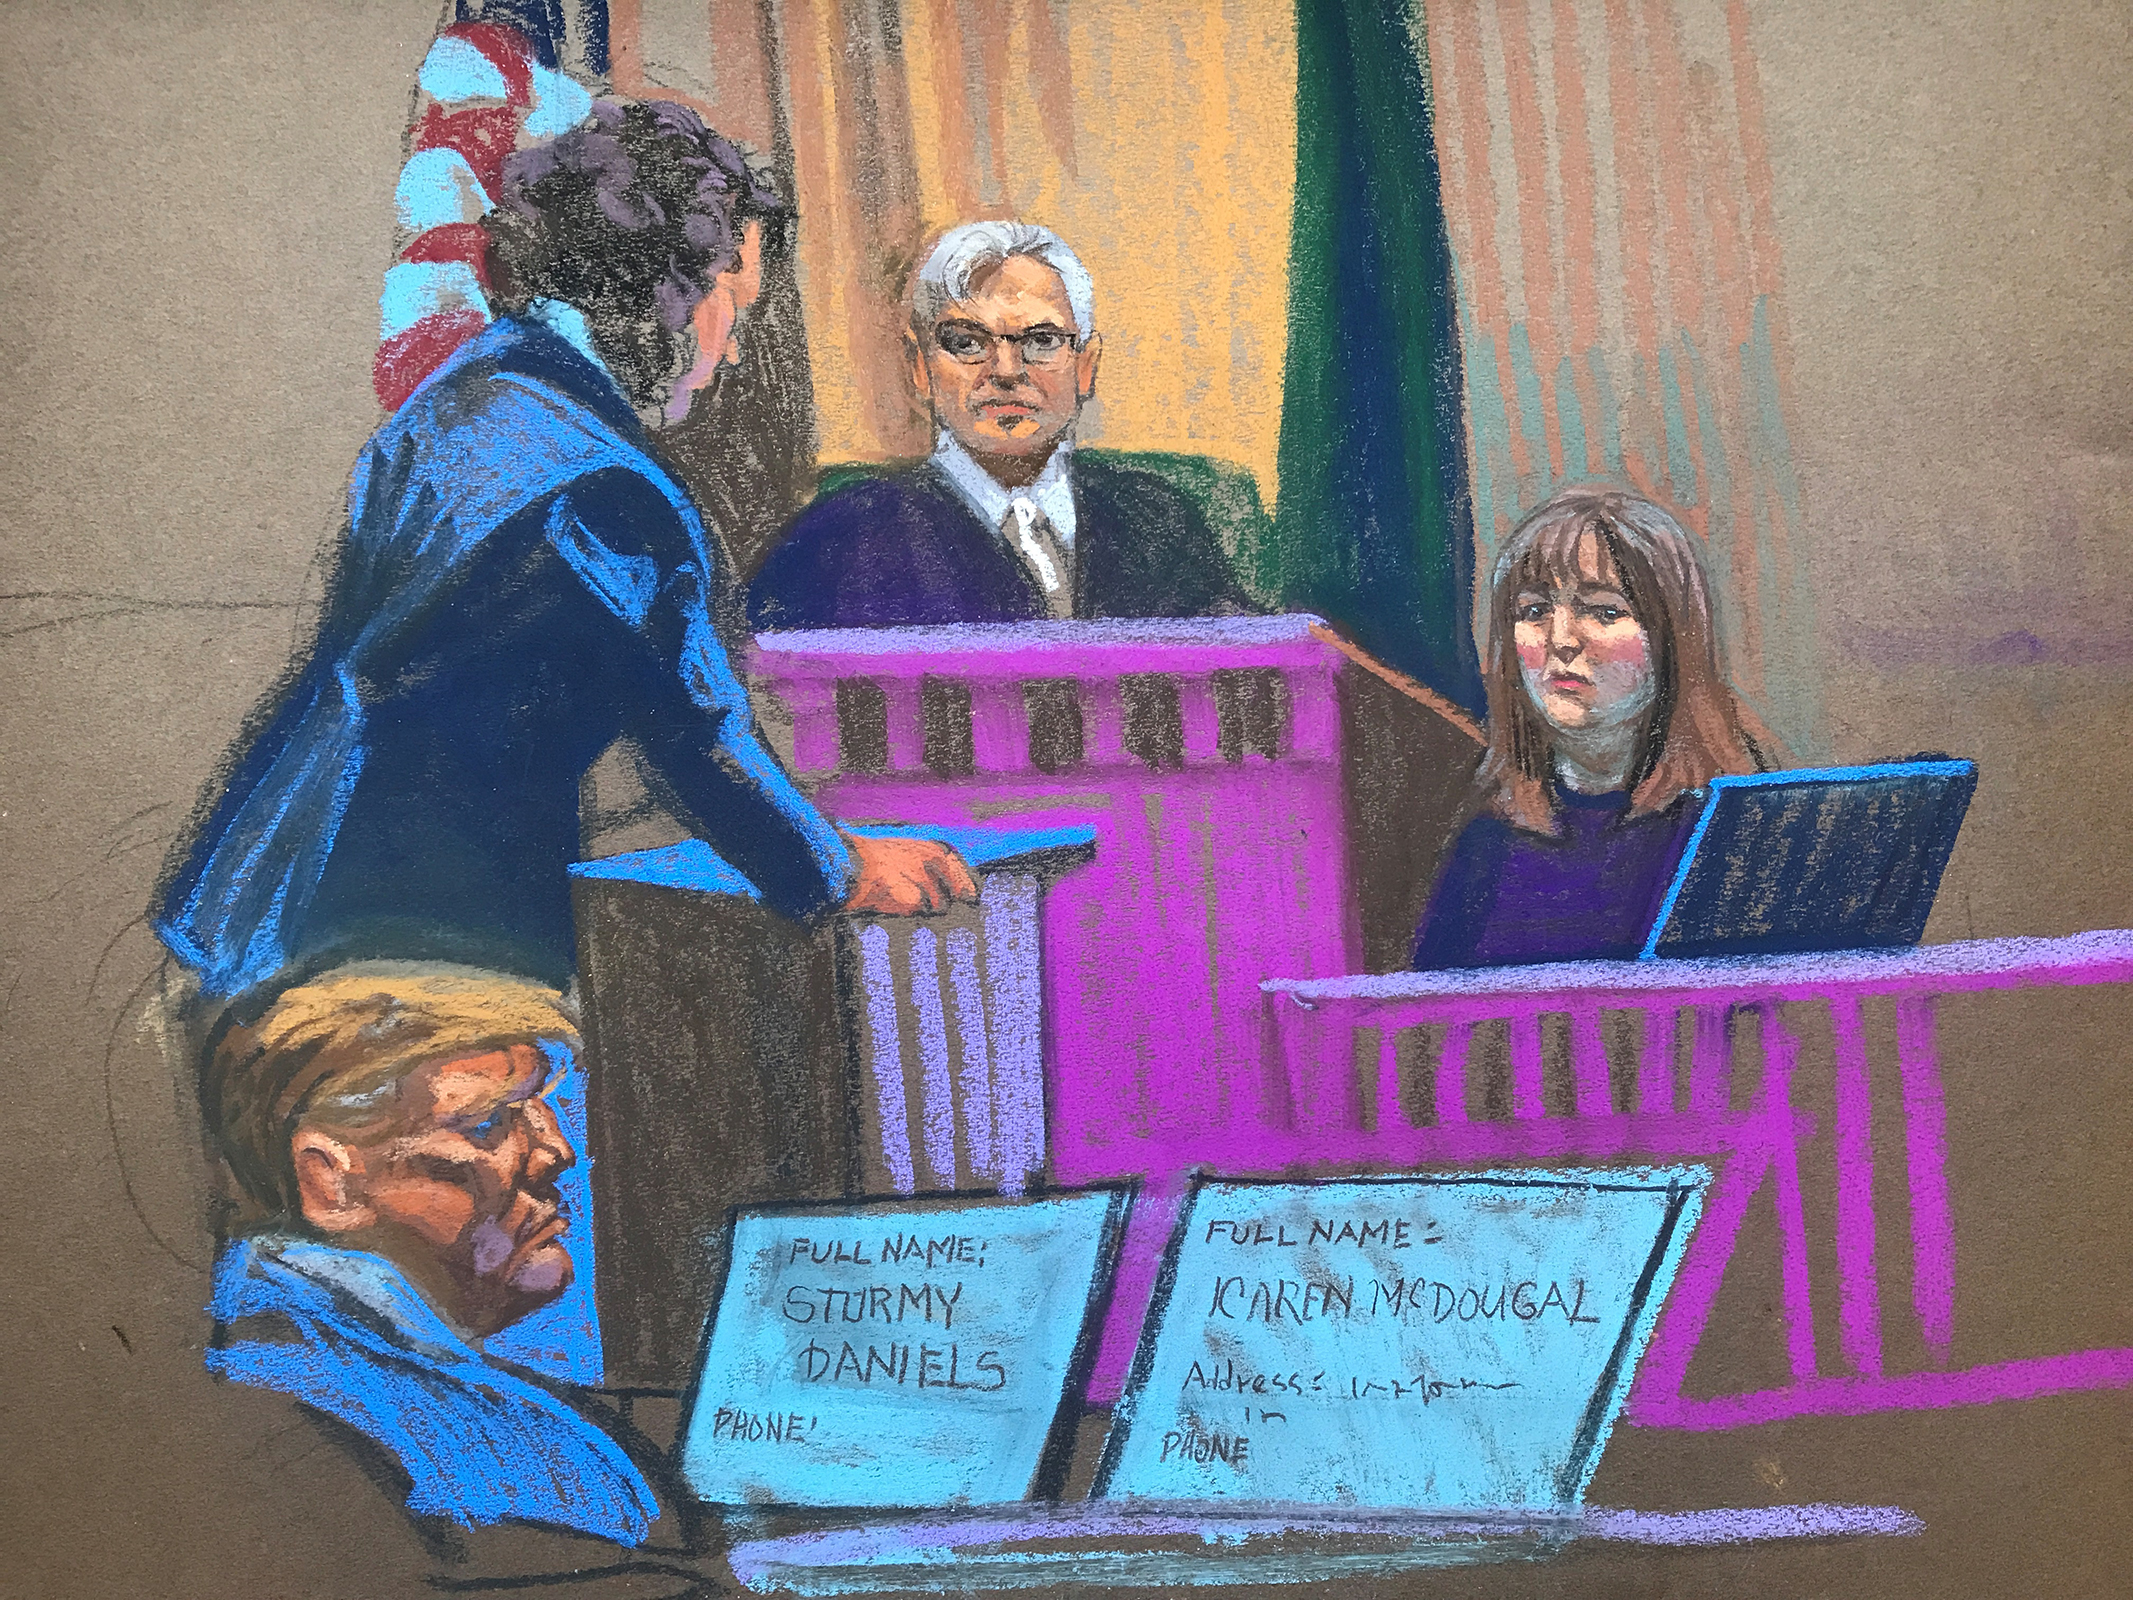 Trump watches as Rhona Graff takes the stand on Friday.